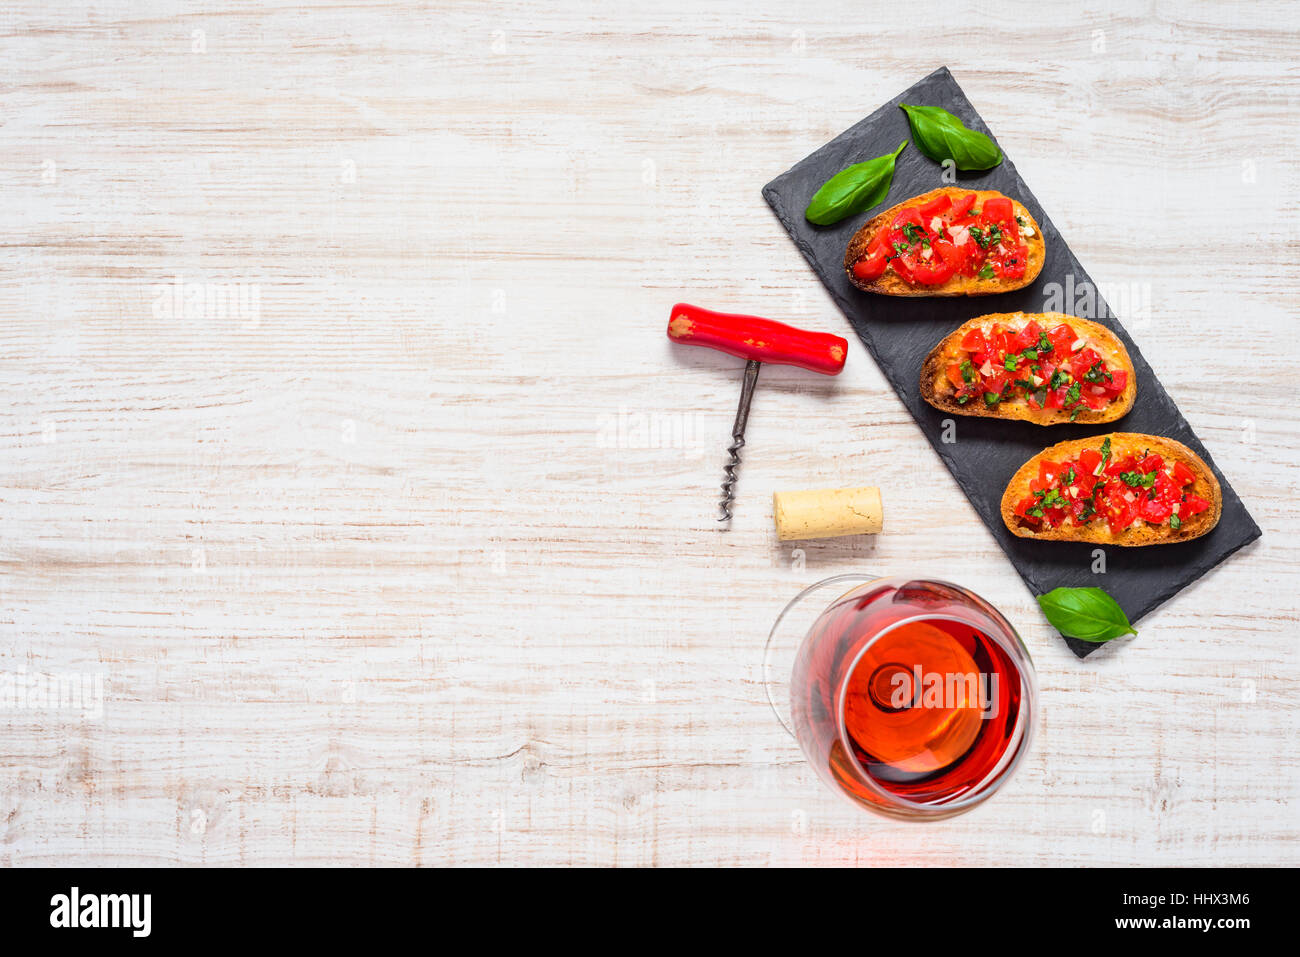 Top View of Bruschetta with tomato, garlic and Basil with a Glass of Rose Wine and on Copy Space Text Area Stock Photo